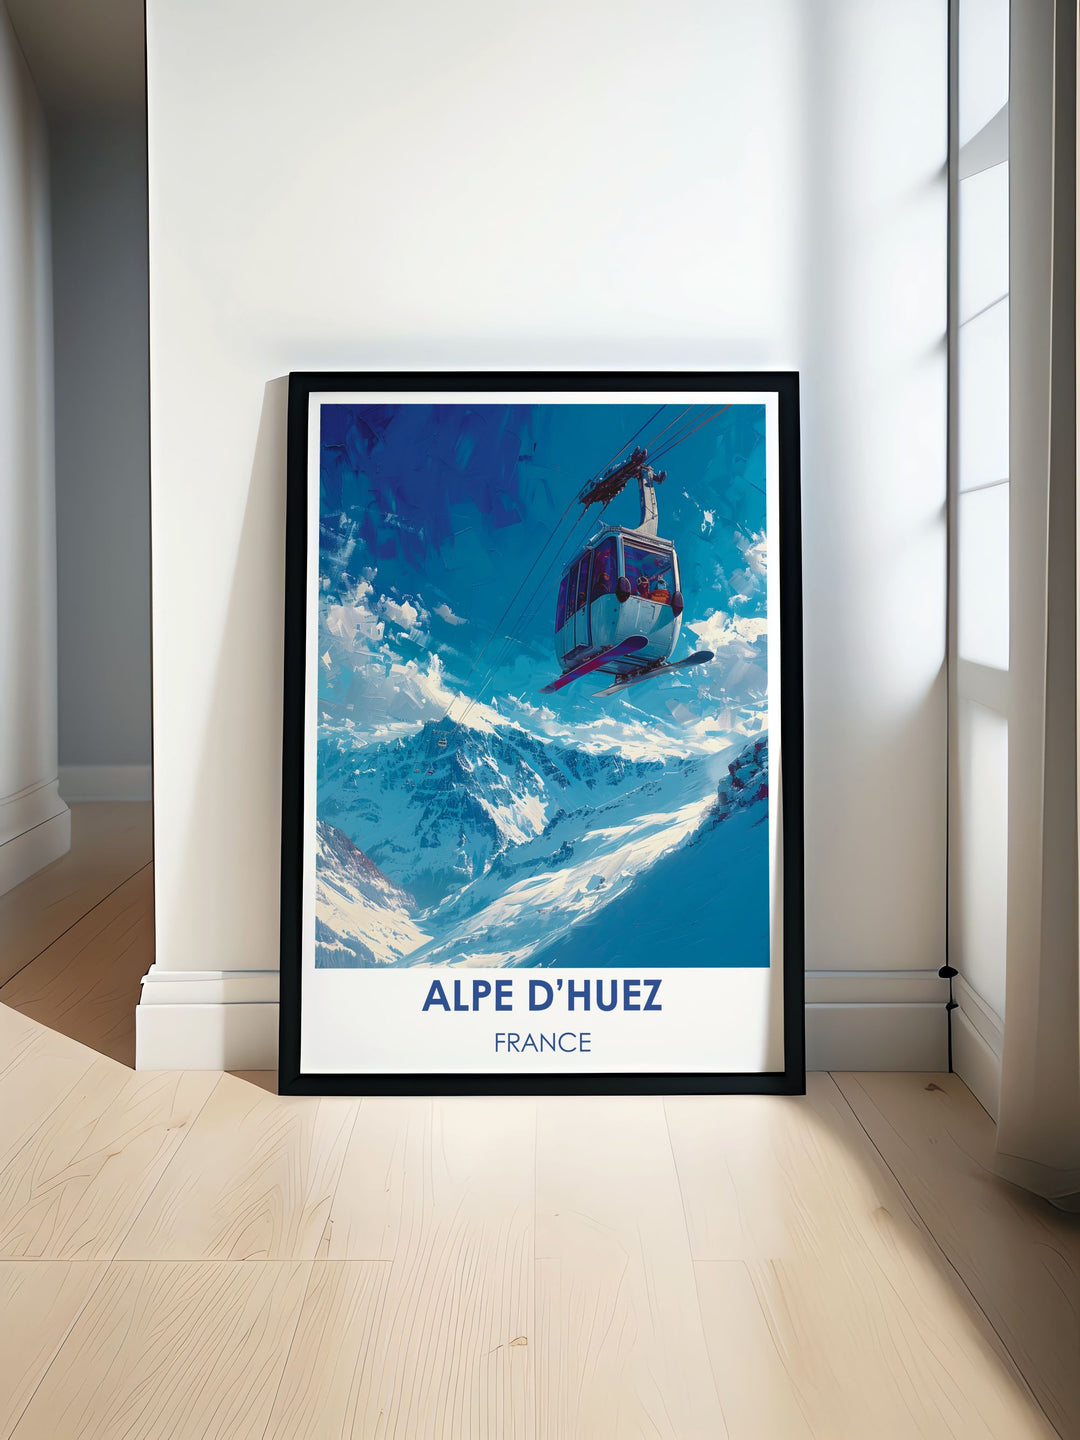 Modern wall decor featuring the elegant slopes of Alpe dHuez, ideal for adding a contemporary alpine touch to any living space.